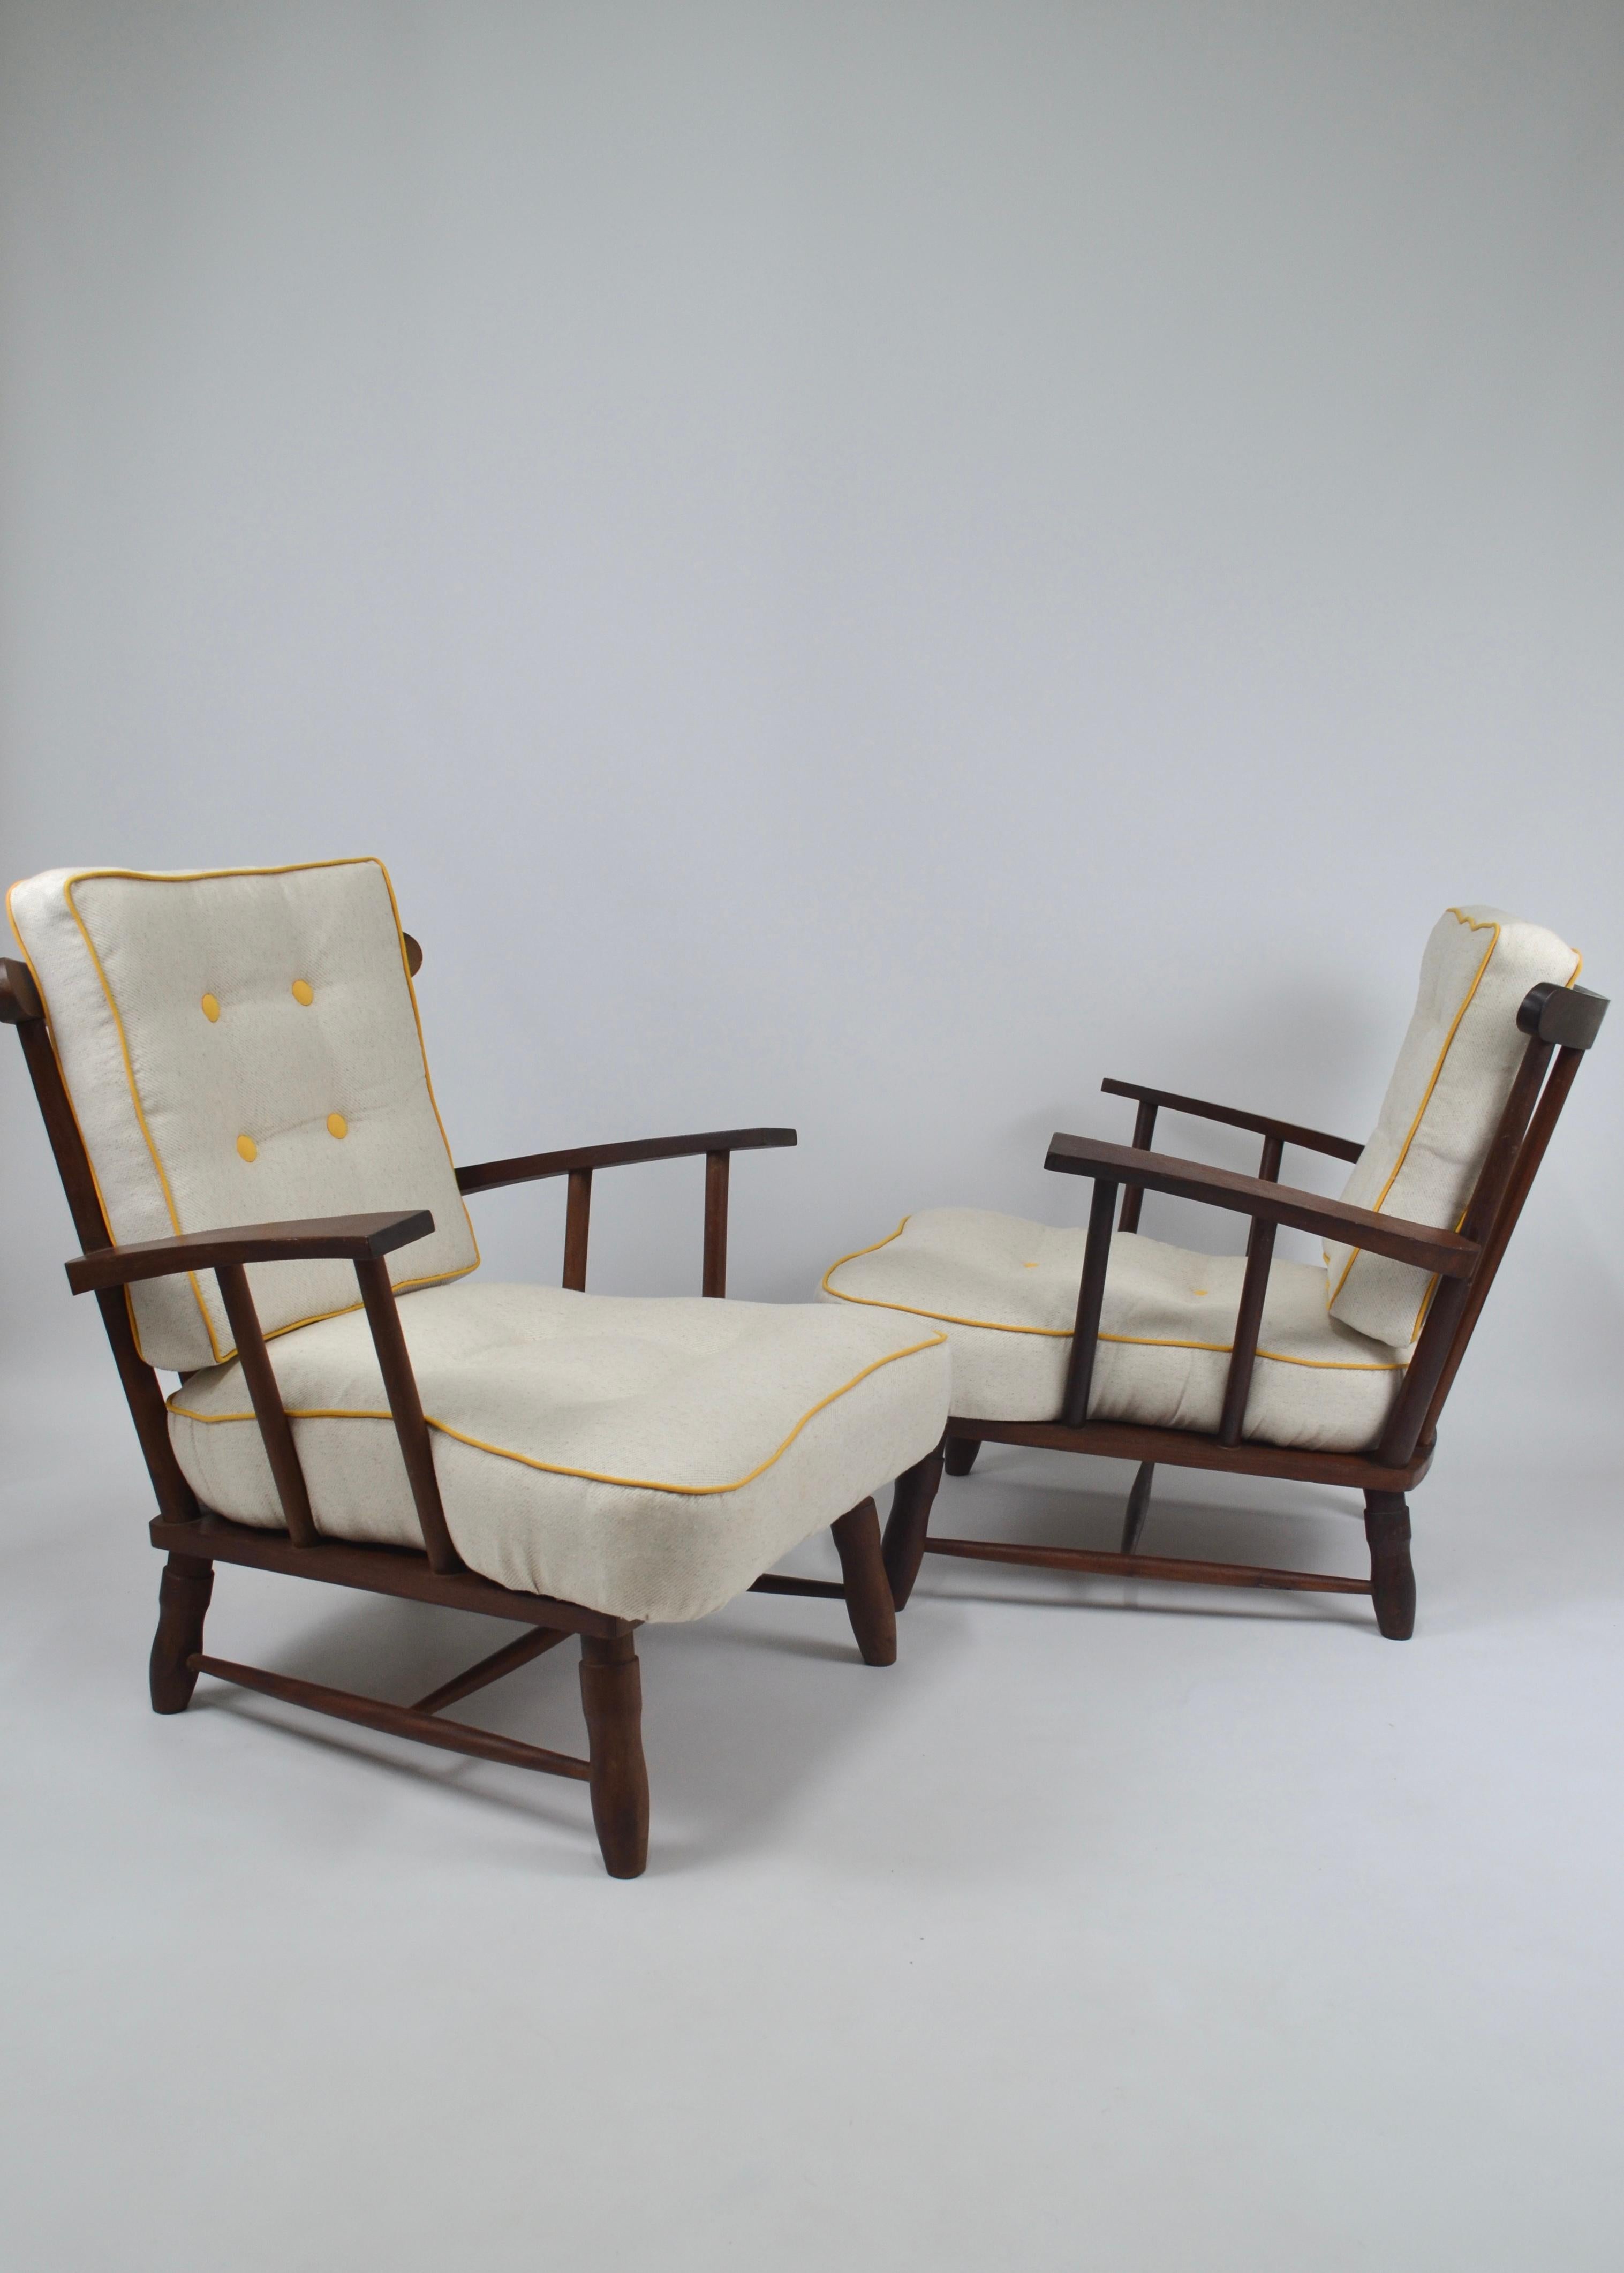 Set of 2 mid century armchairs
Fully reupholstered.
Very confortable and elegant !